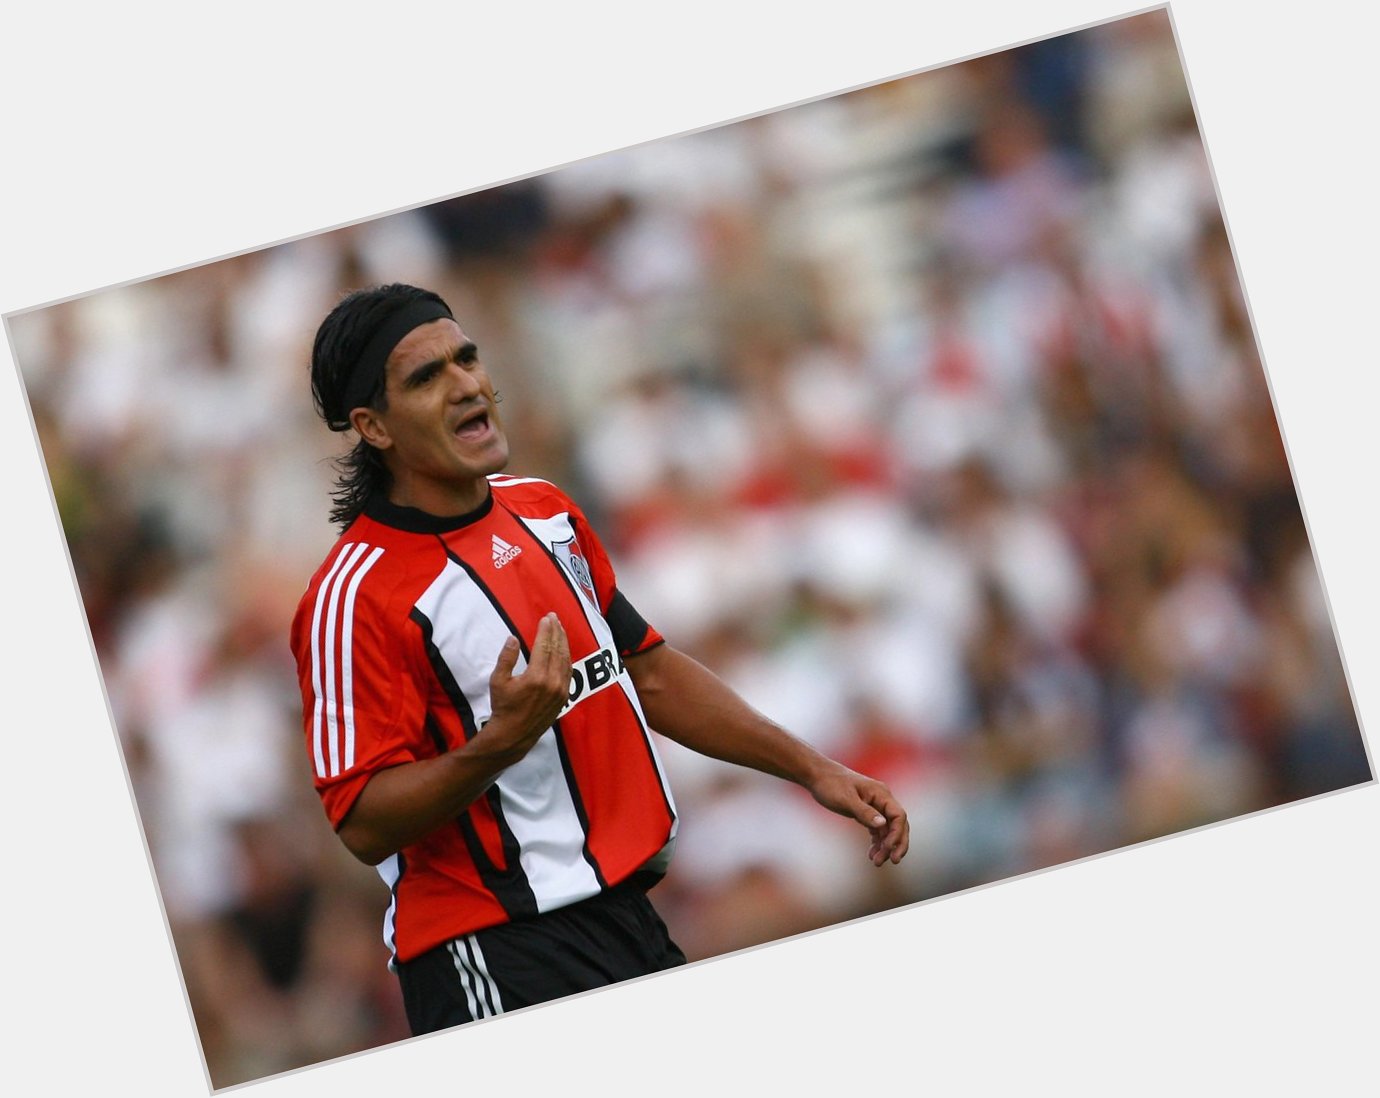 One of the best players never to have played in the Happy birthday, Ariel Ortega! 